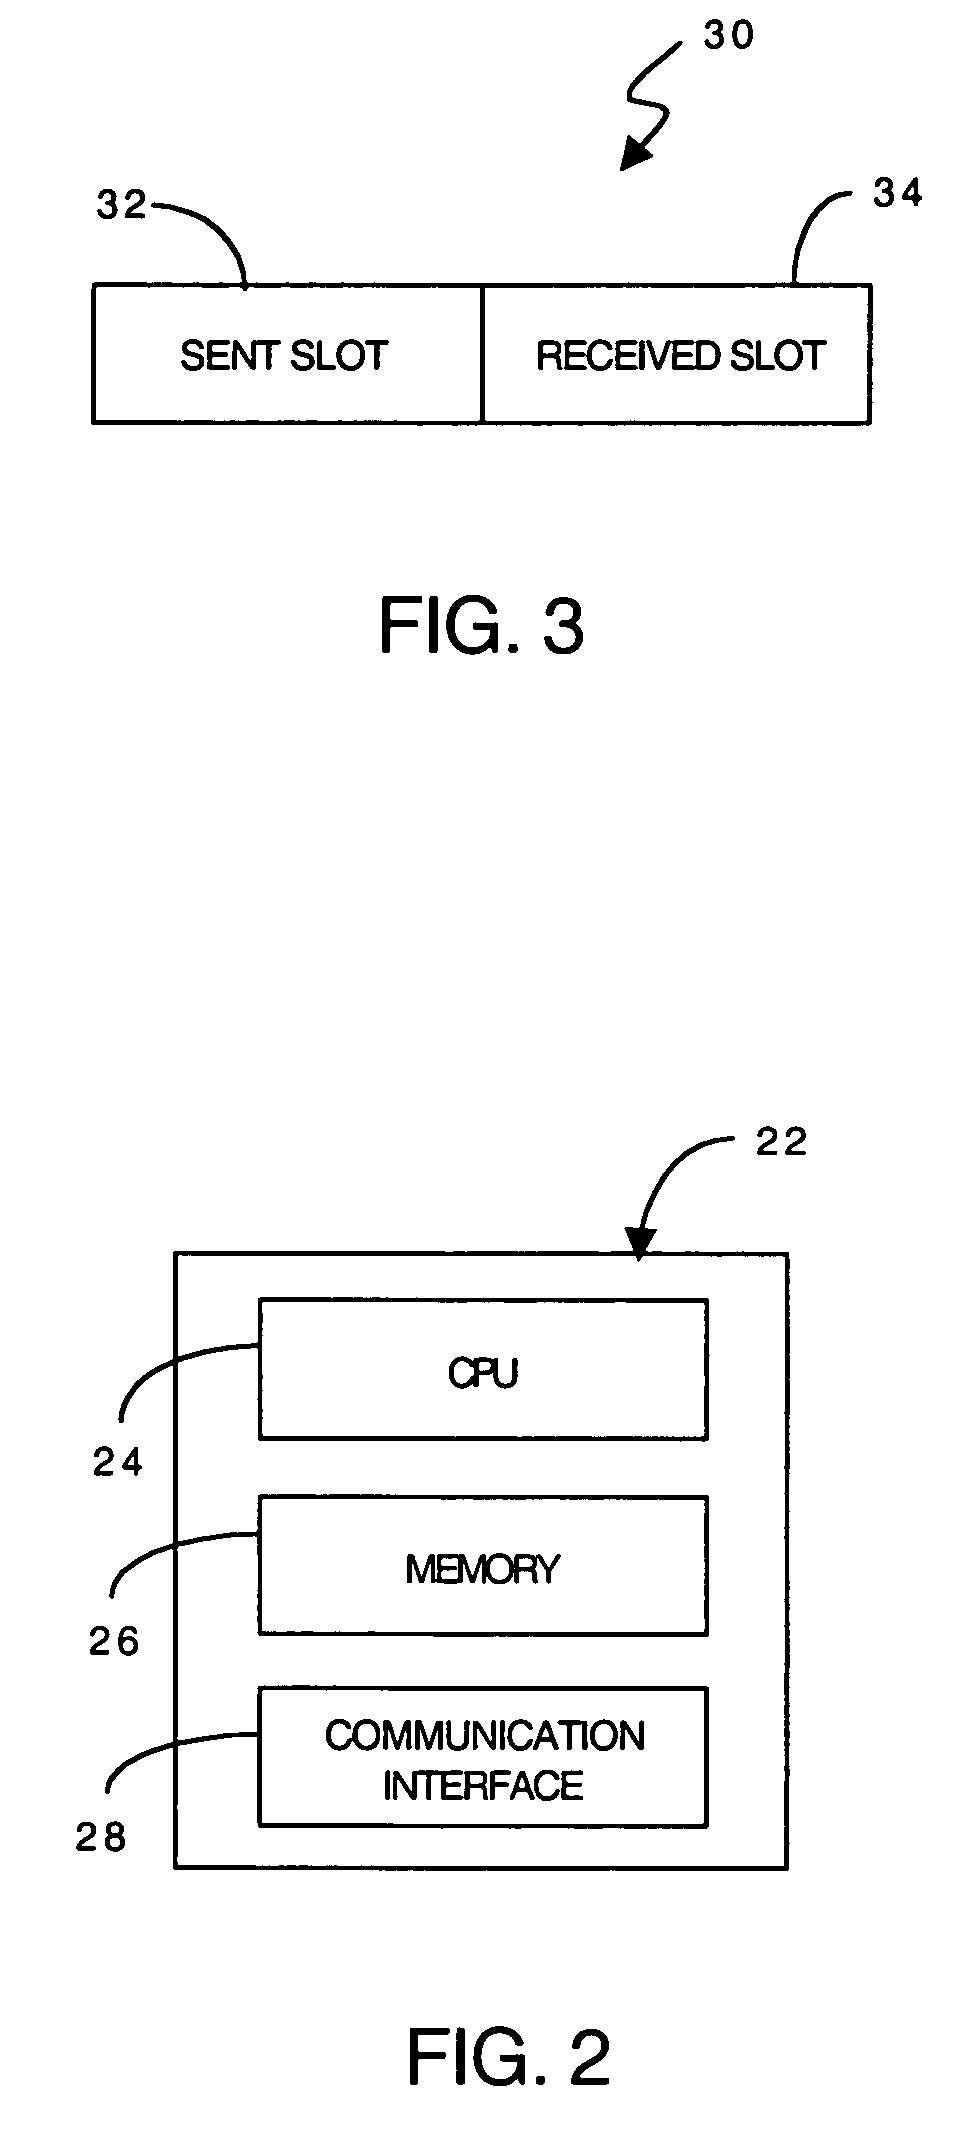 Method and apparatus for calculating packet loss for a communication circuit